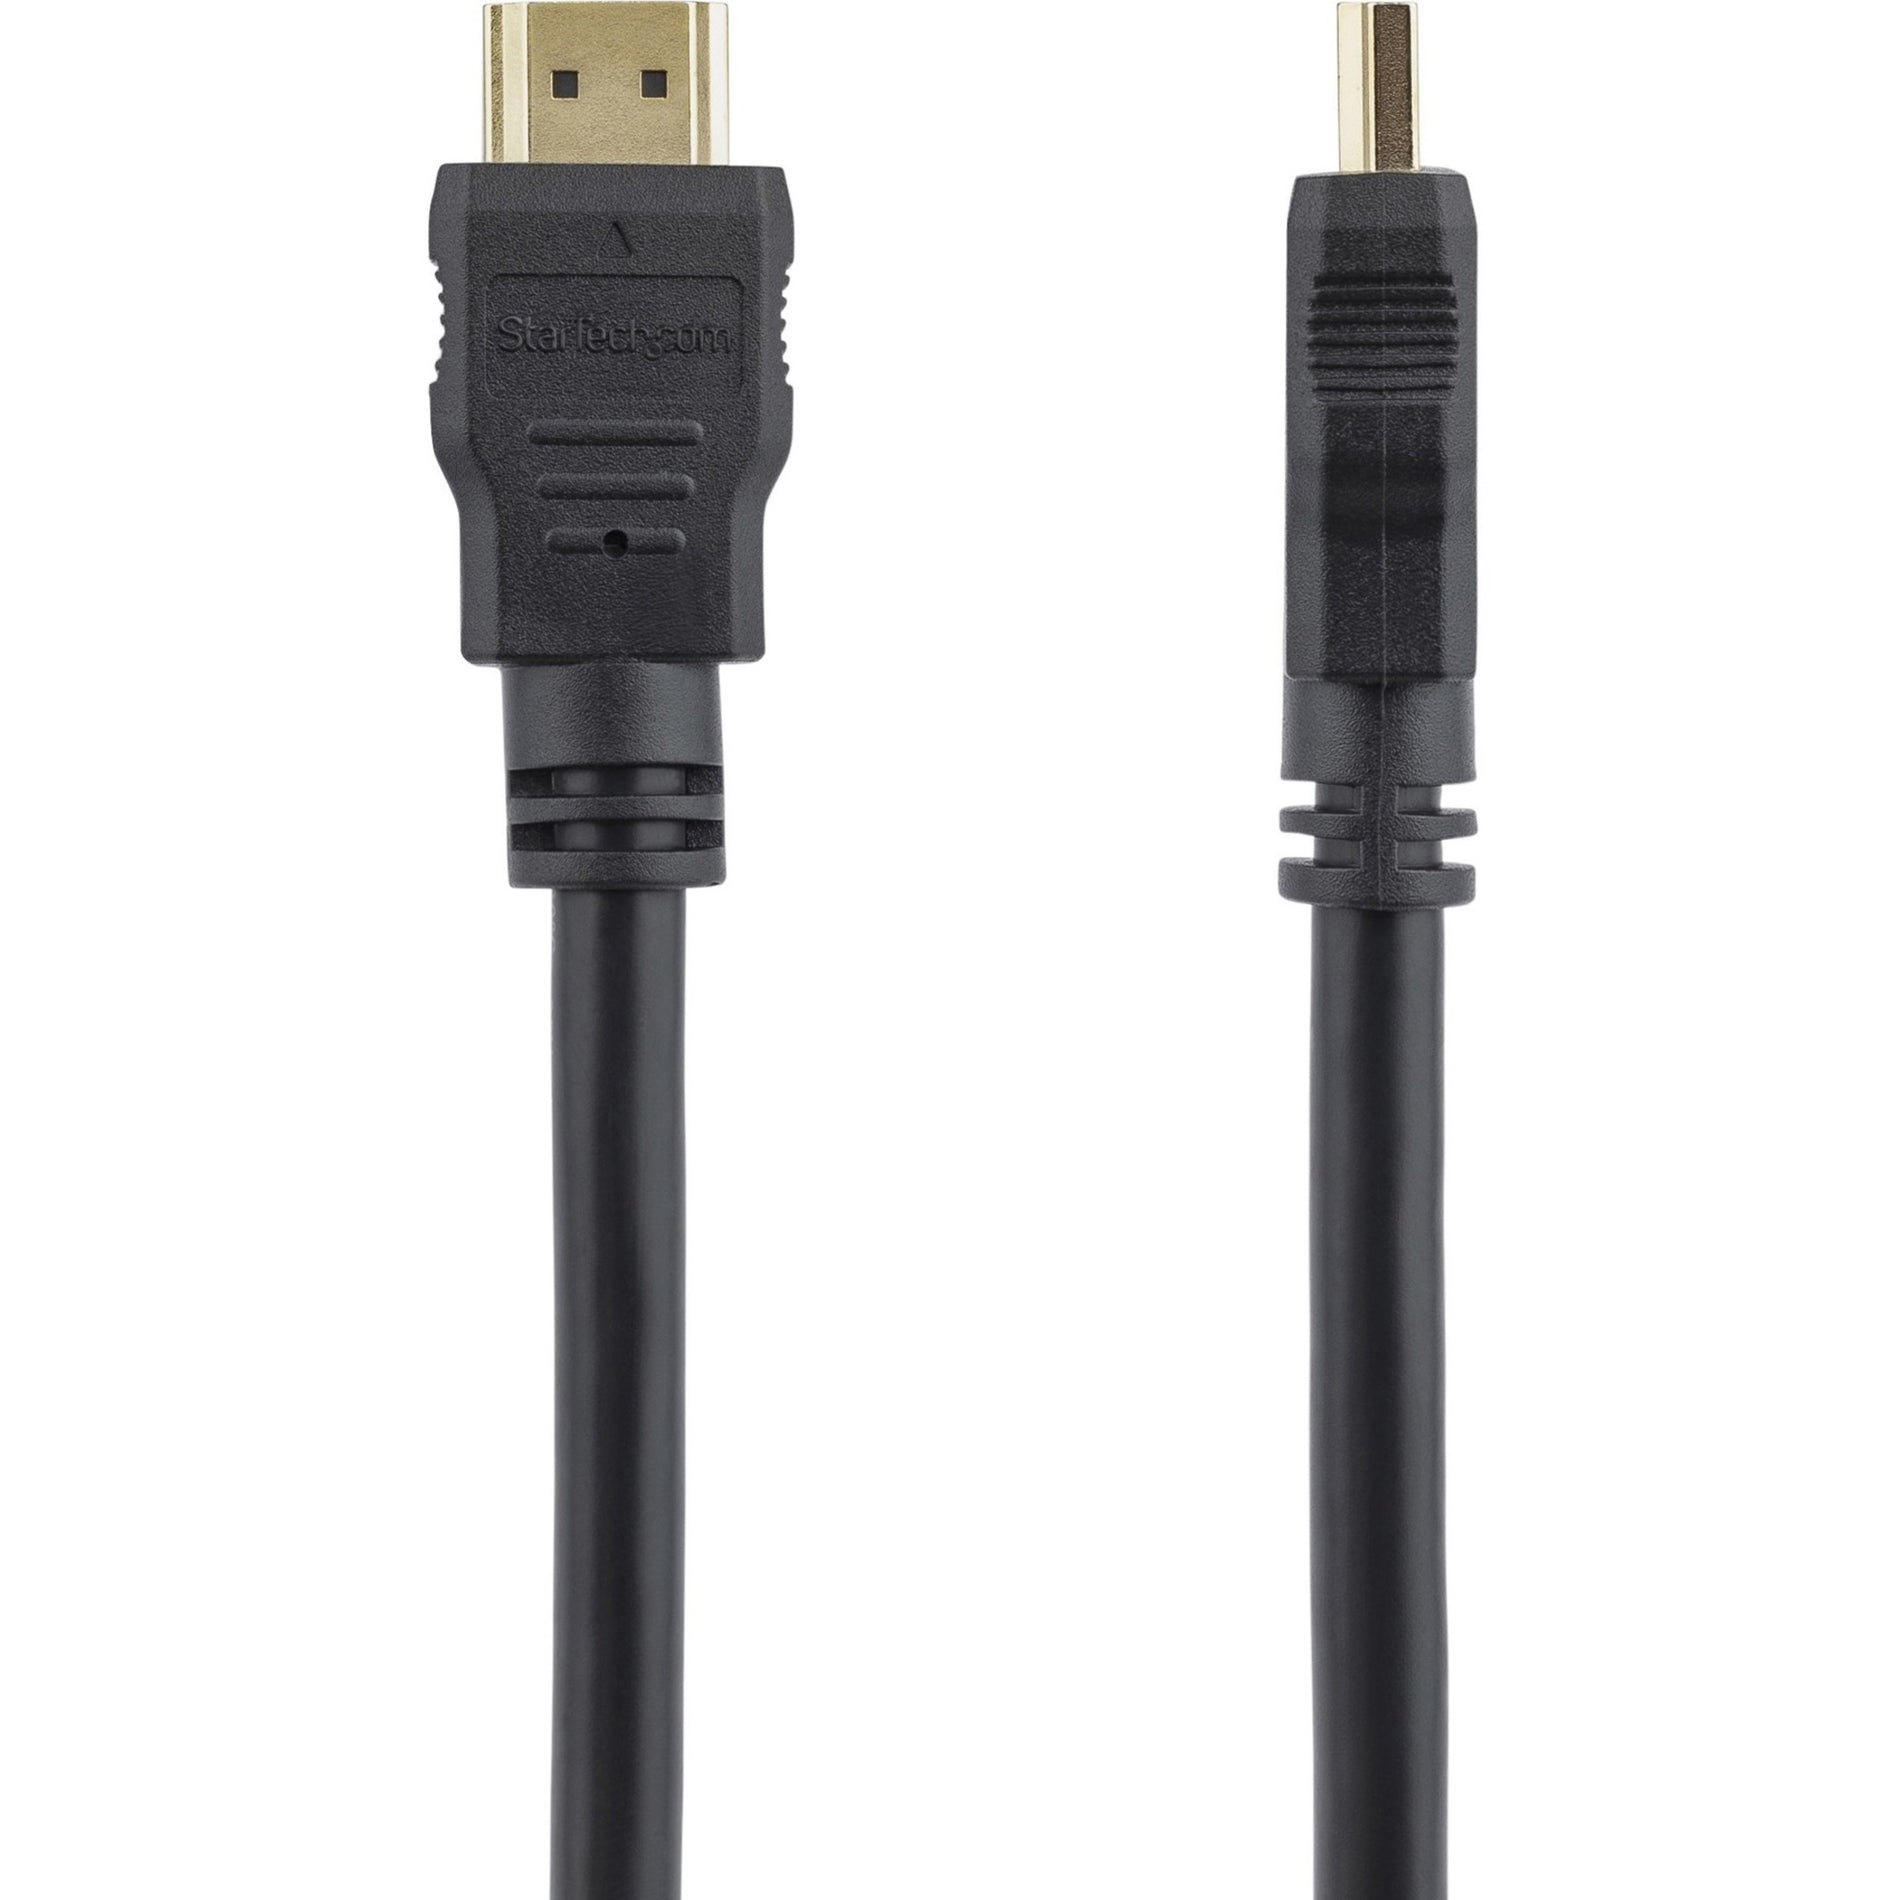 StarTech.com HDMM12 12 ft High Speed HDMI Cable - Ultra HD 4k x 2k HDMI Cable, Strain Relief, Corrosion-free, Molded, Gold Plated Connectors, Black